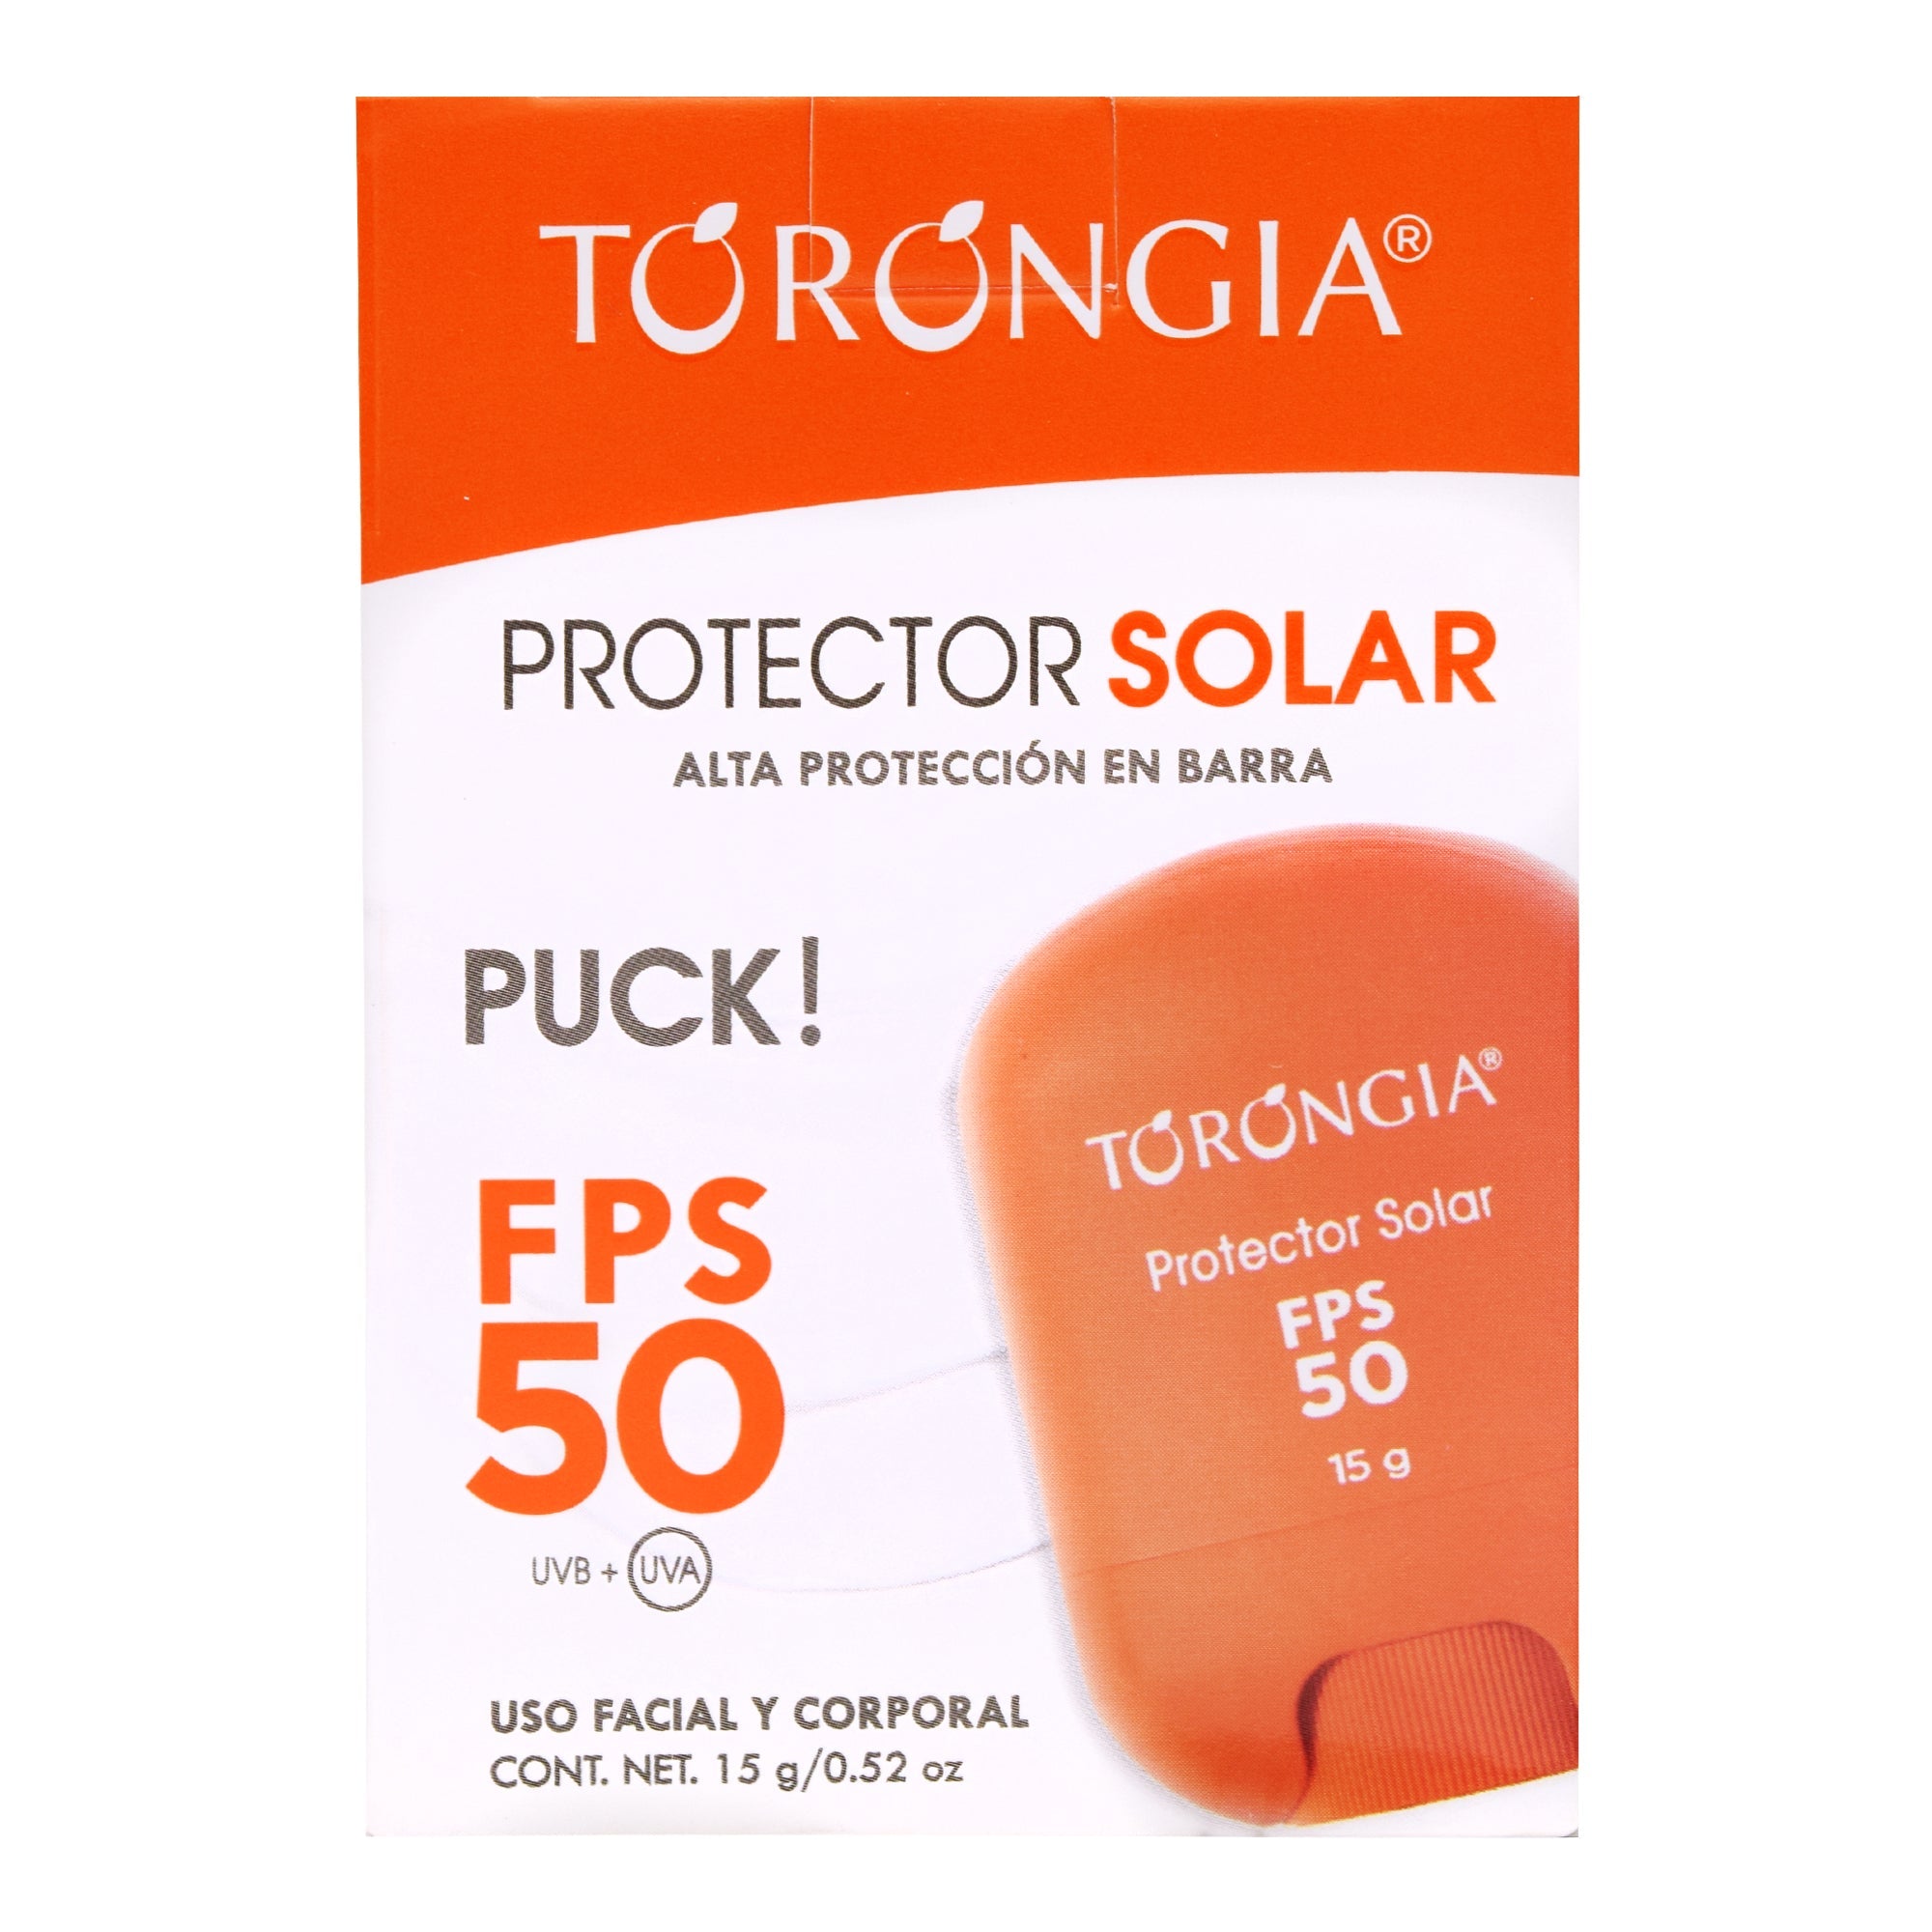 Protector solar 50 fps 15 g